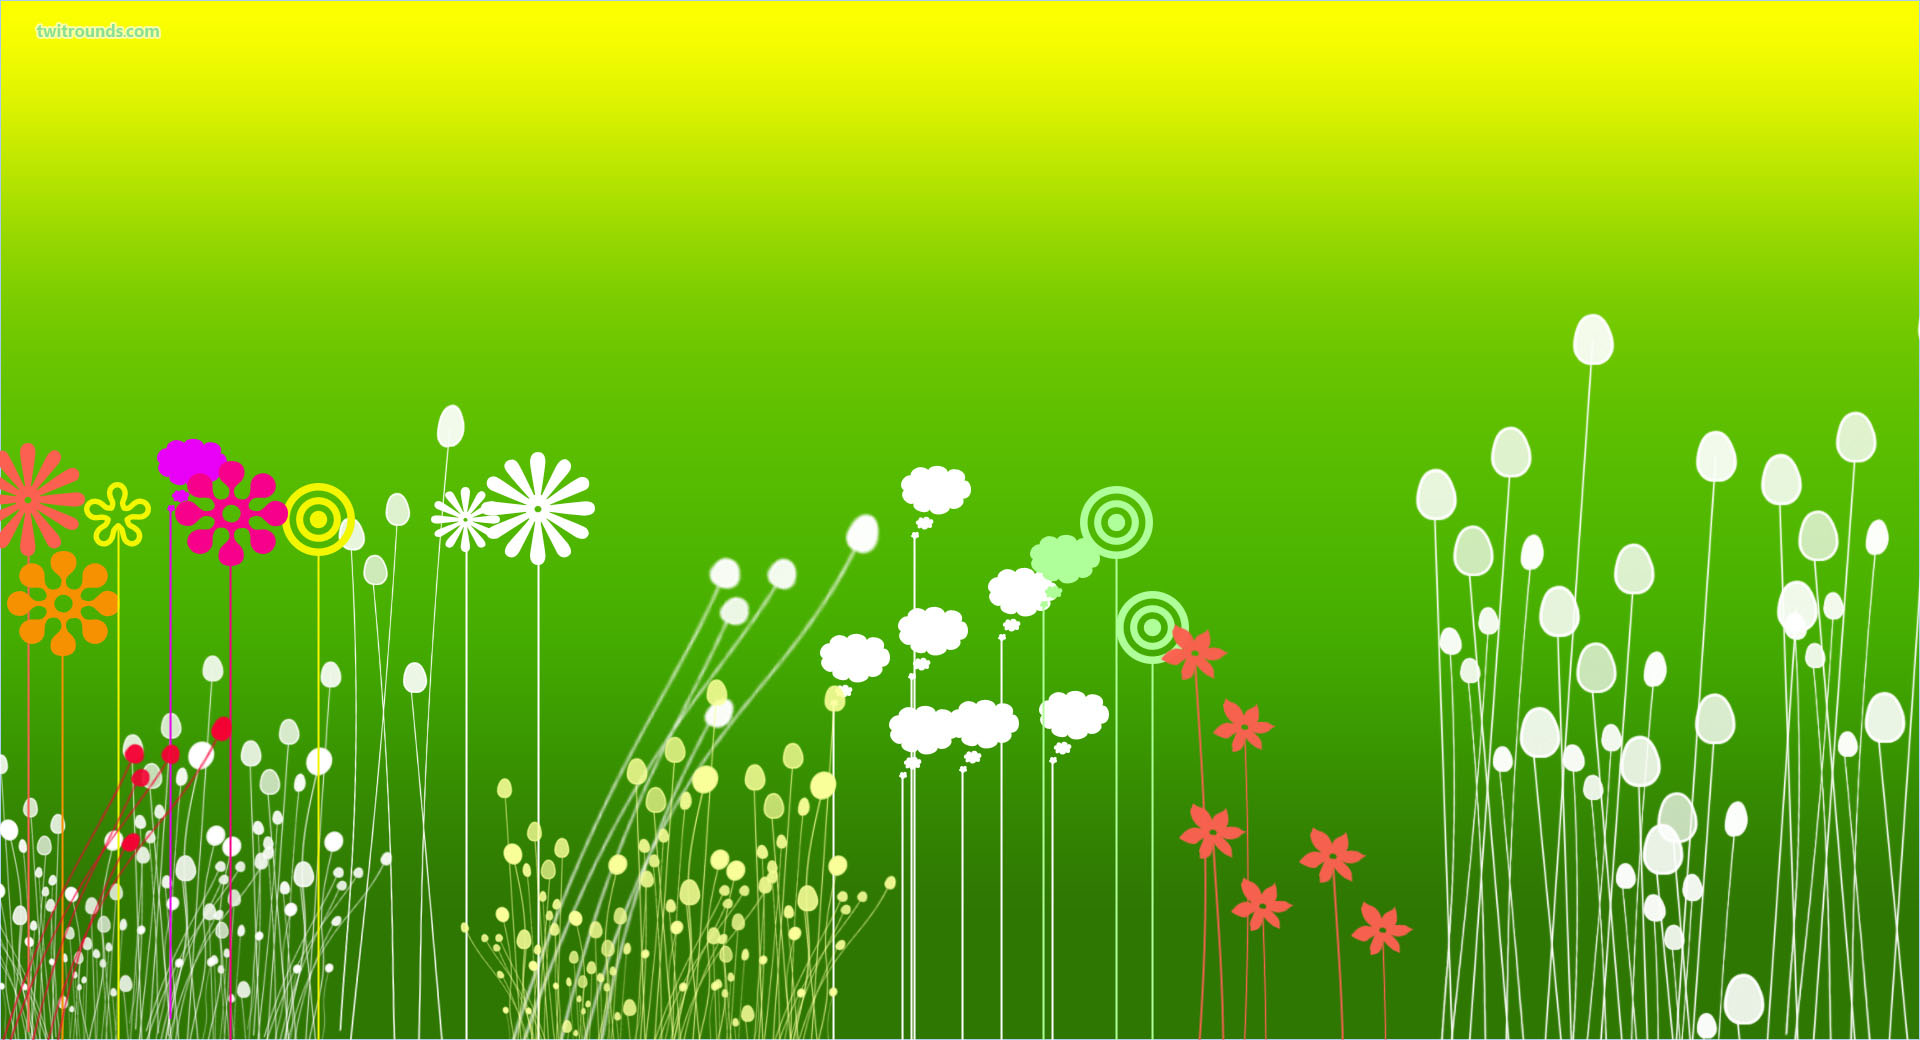 animated green flowers image pc